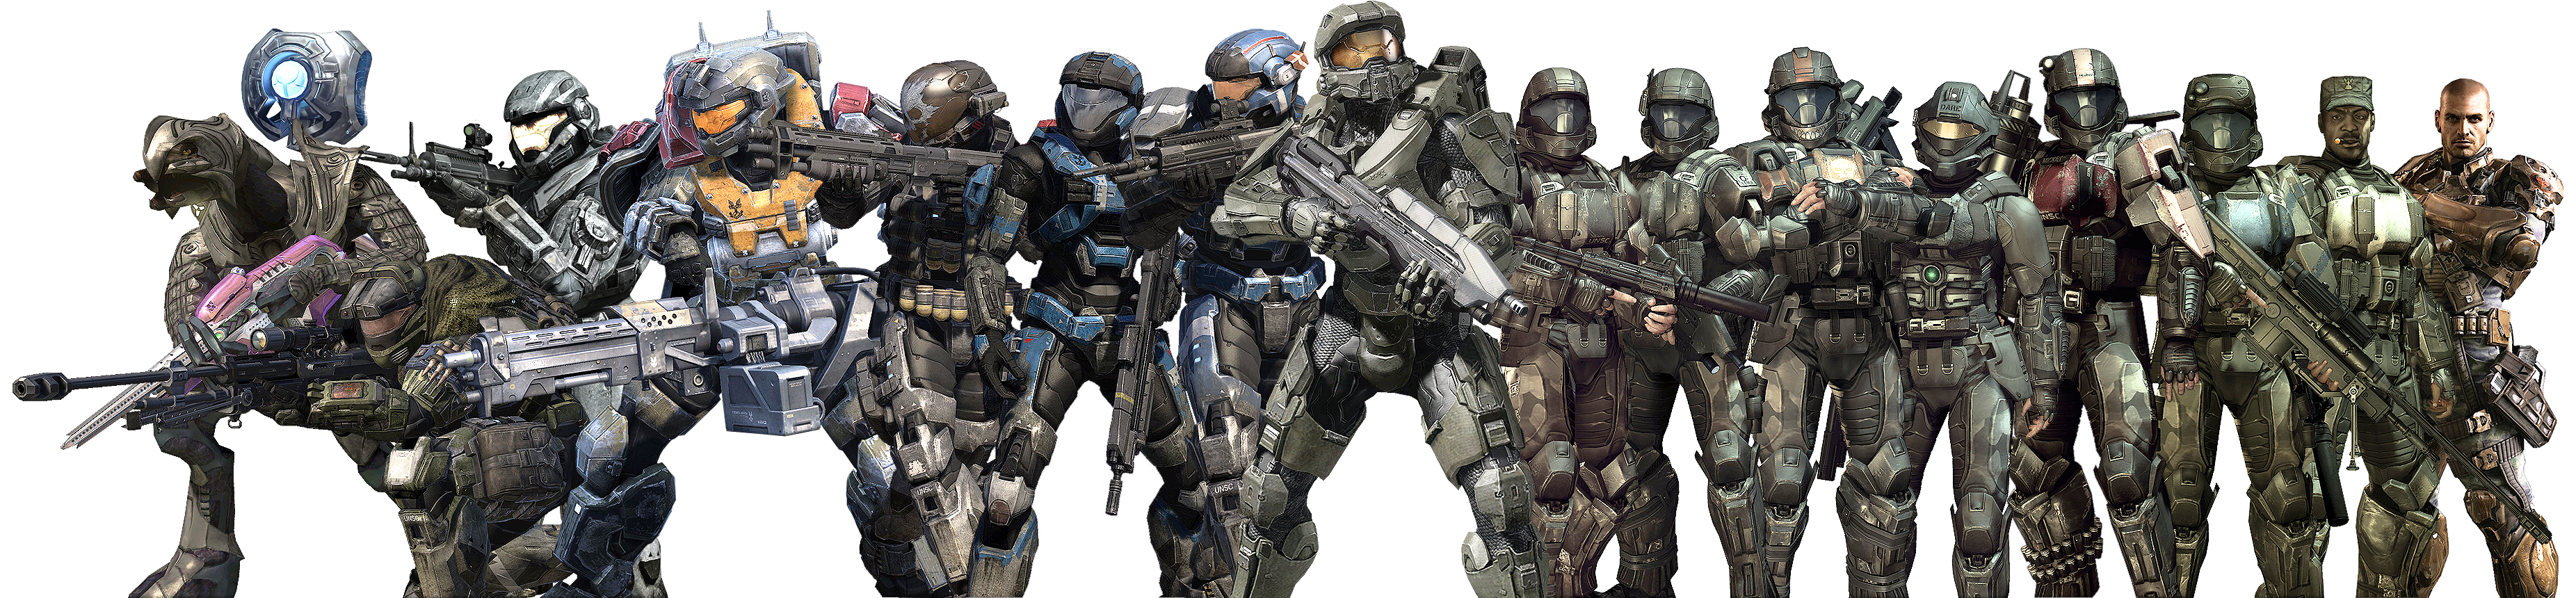 http://fc09.deviantart.net/fs71/f/2012/183/6/b/halo___heroes_group_render_2___big_by_crussong-d55oyoe.png